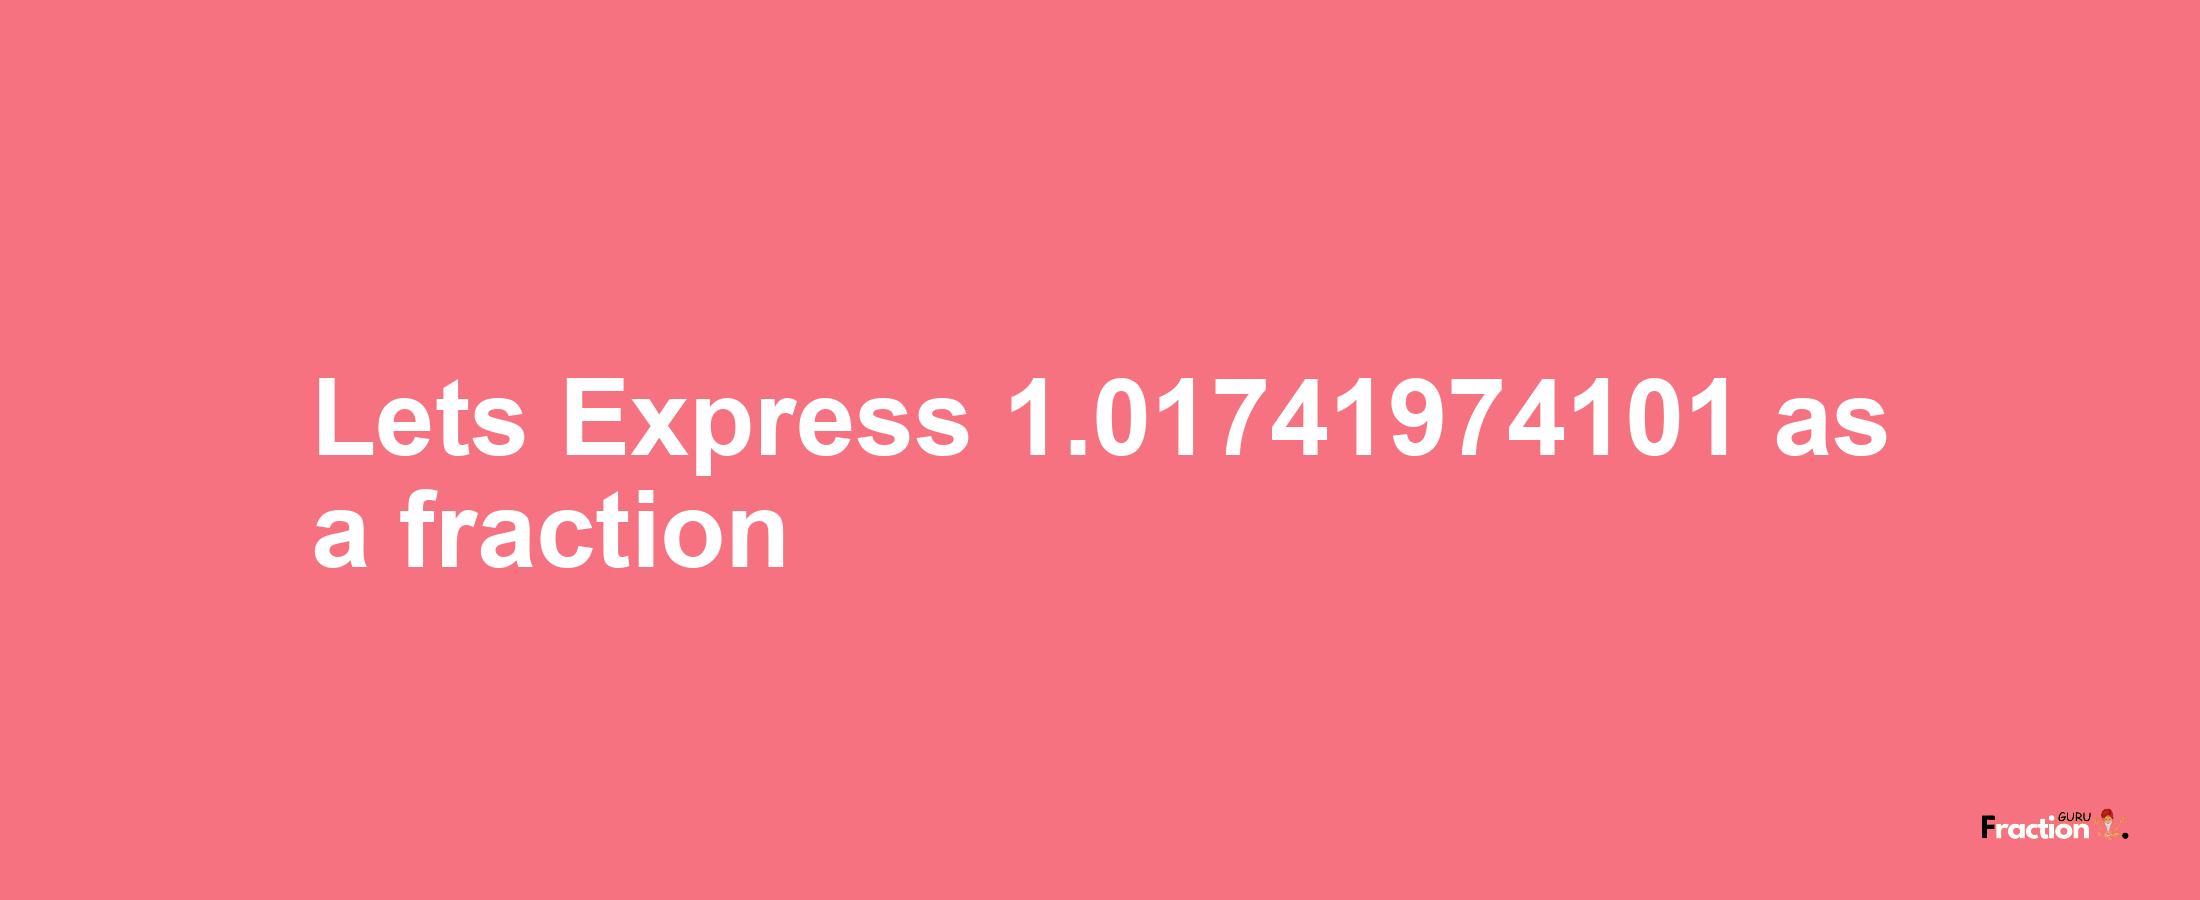 Lets Express 1.01741974101 as afraction